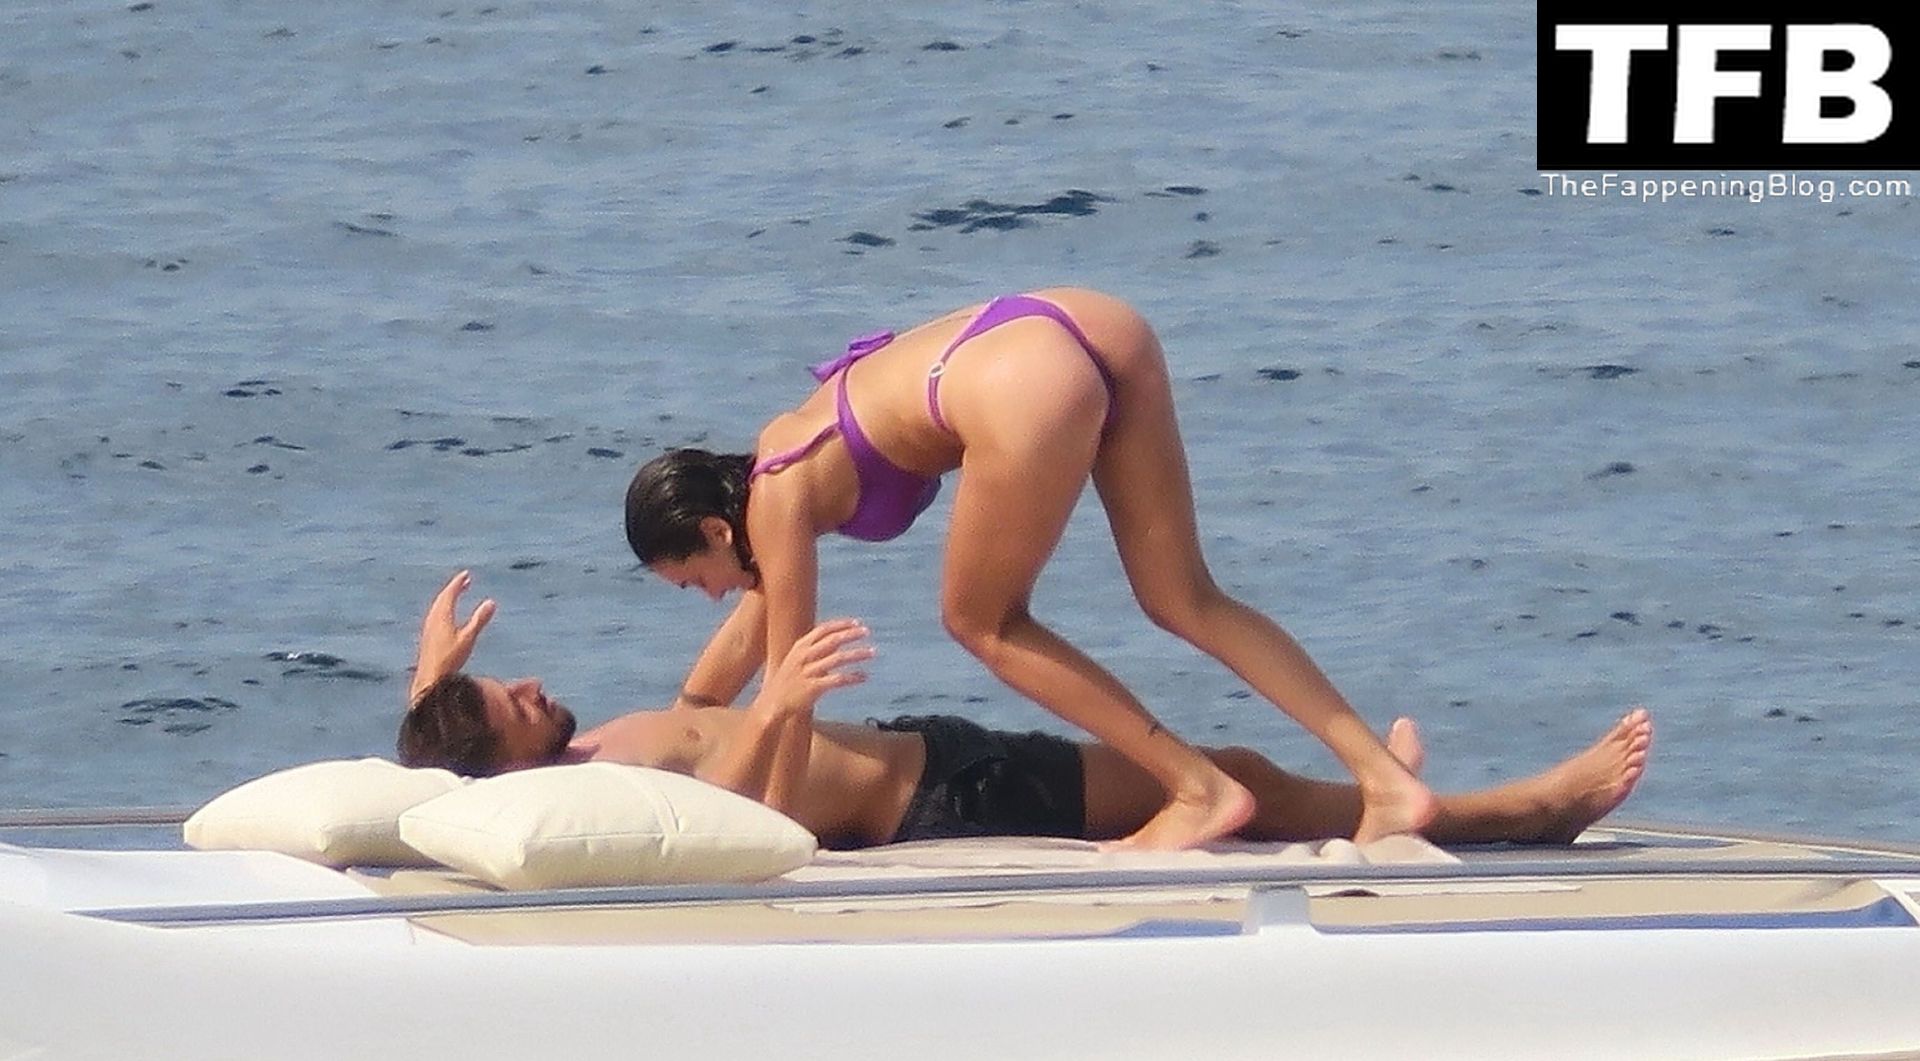 Ruben Dias Packs on the PDA with a Mysterious Scantily-Clad Woman on a Boat in Formentera (32 Photos)